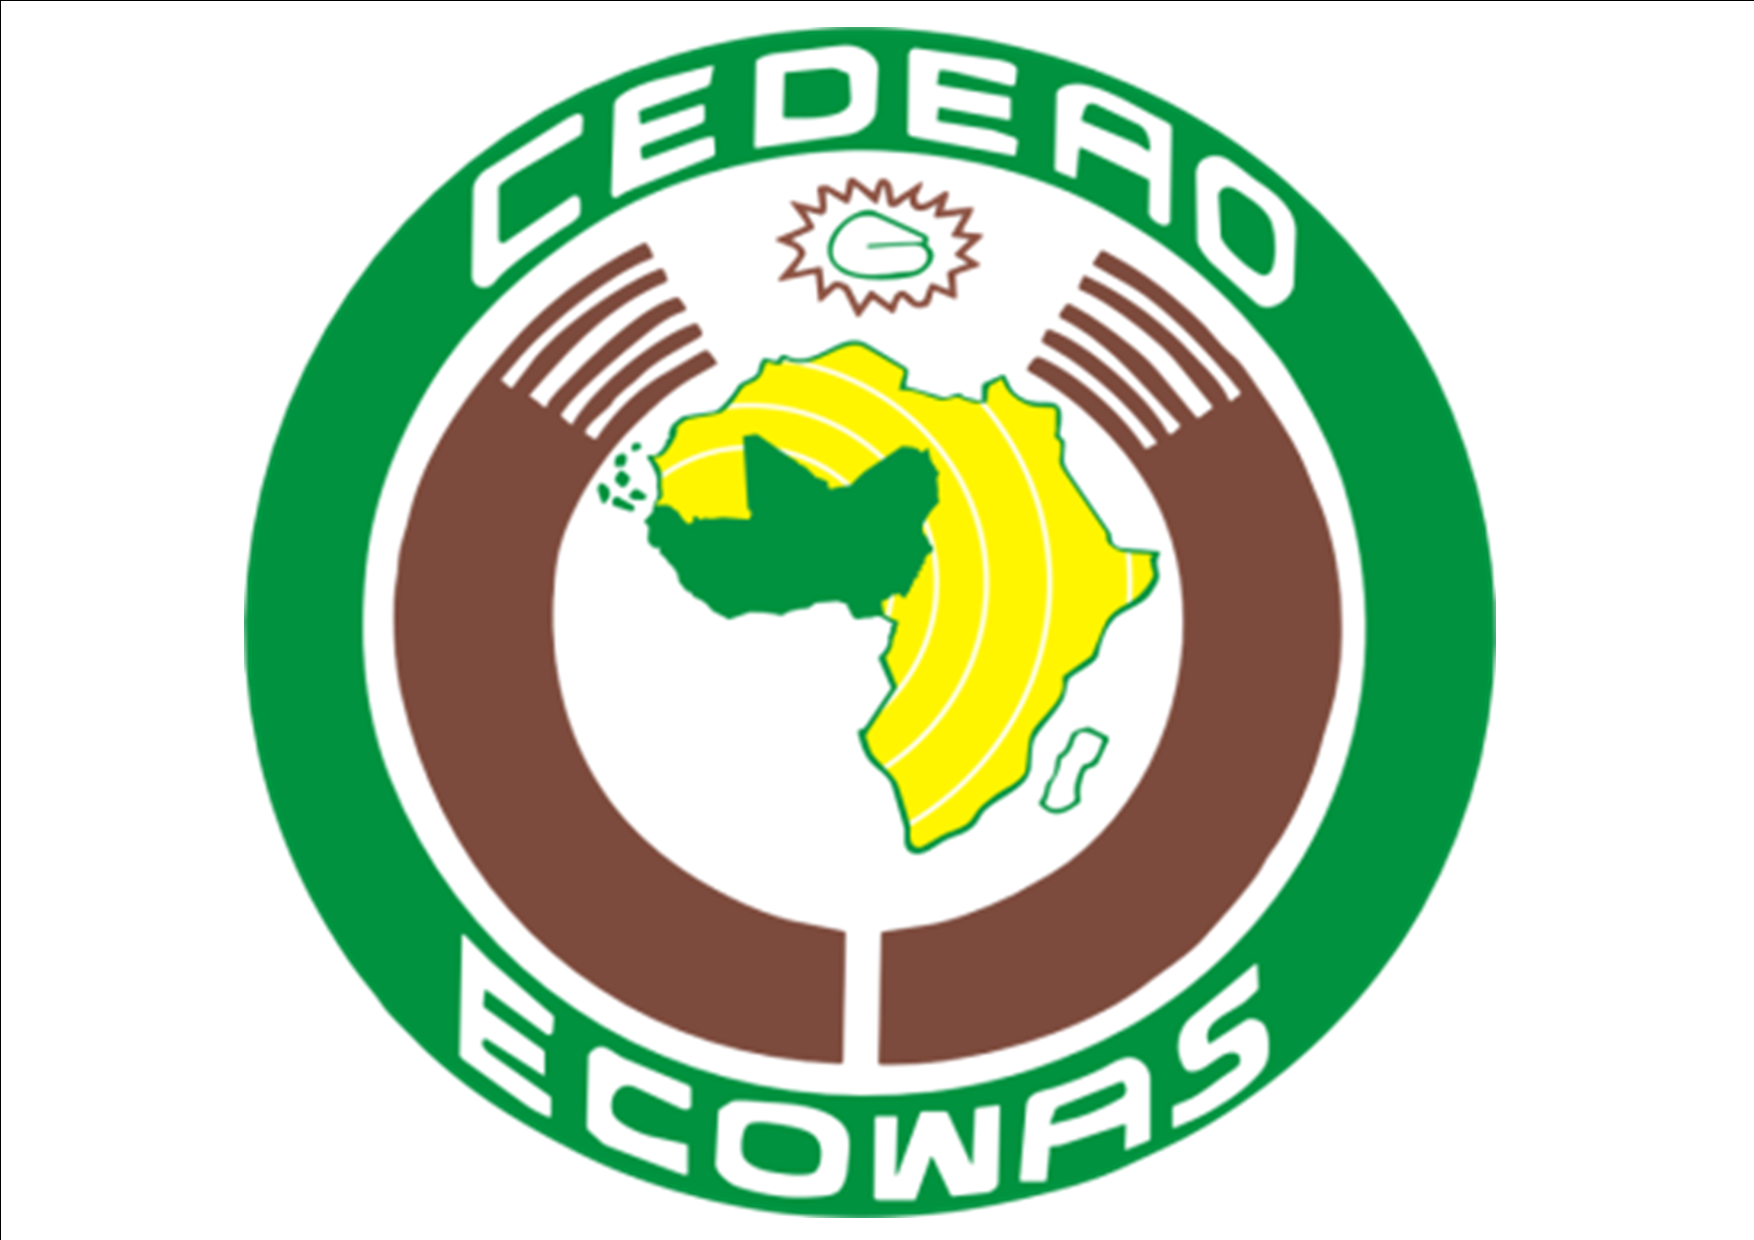 Logistics Specialist at Economic Community of West African States (ECOWAS)